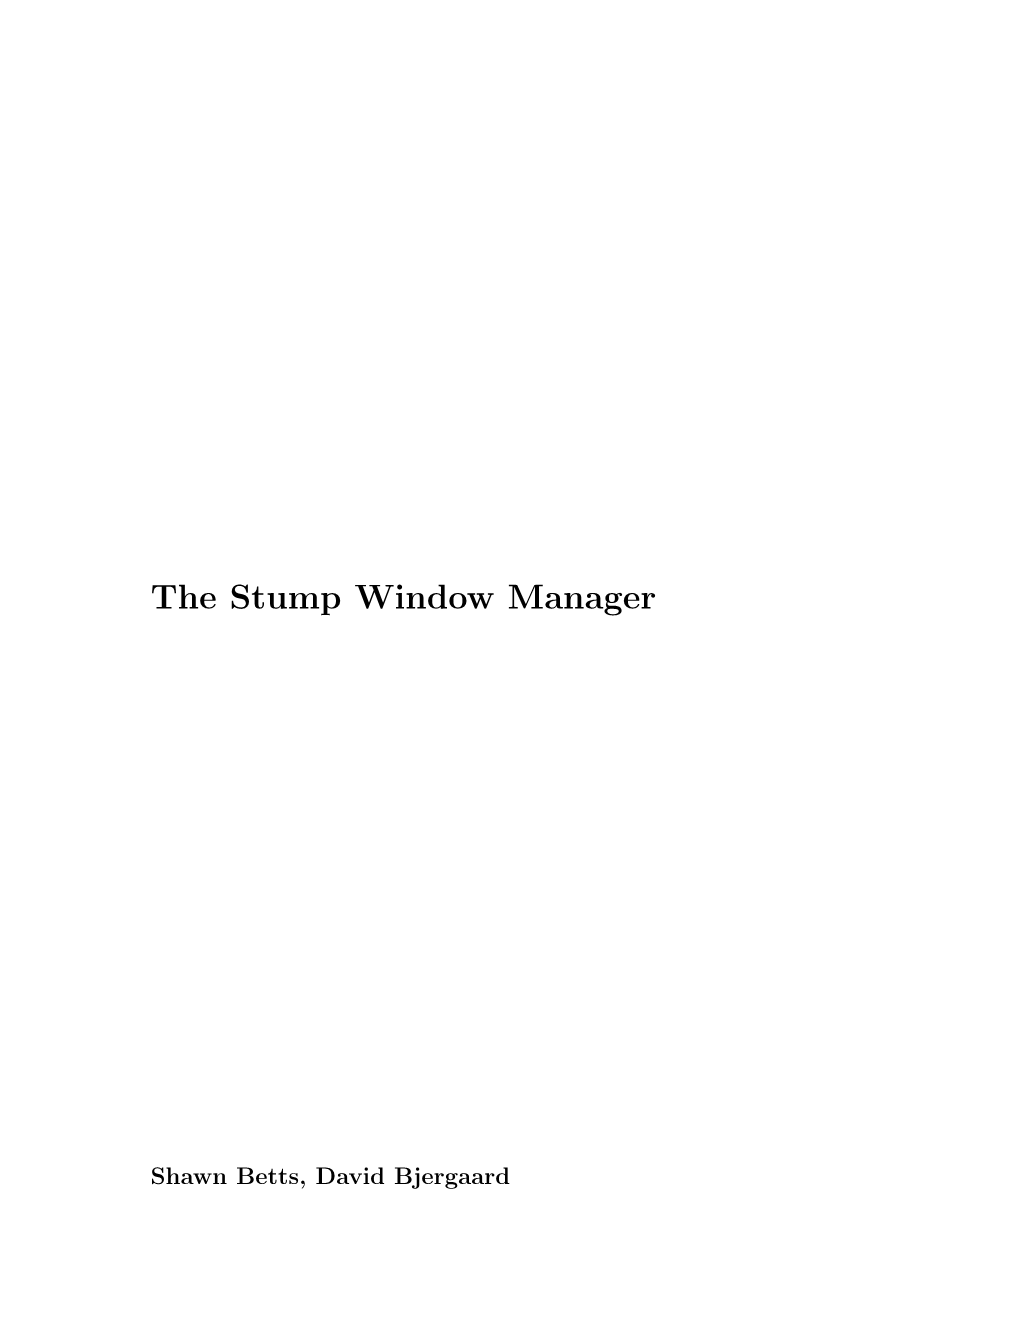 The Stump Window Manager